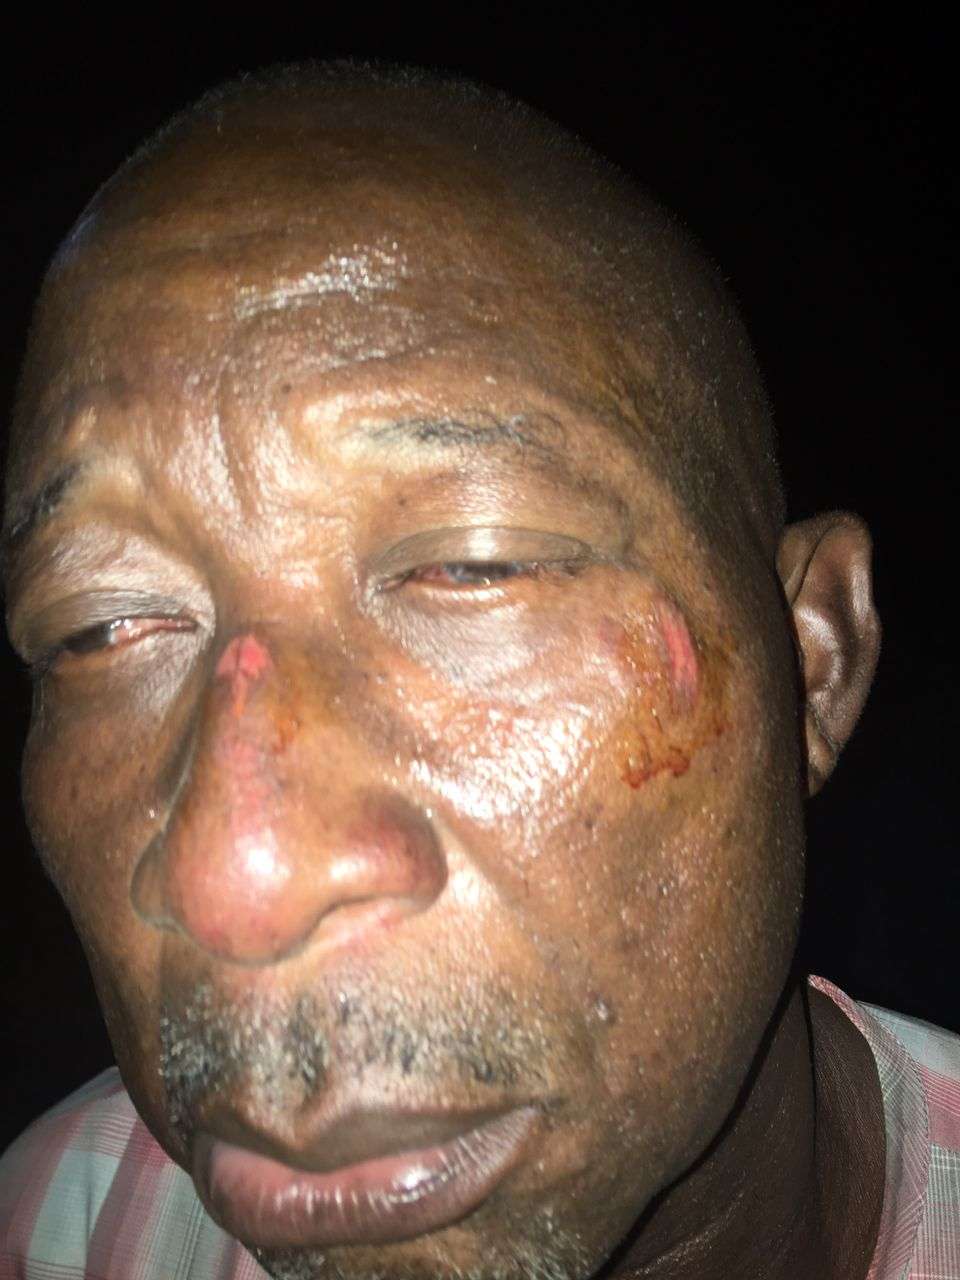 Man Accuse Degema LGA Council Boss Of Physically Assaulting Him, Call For Justice